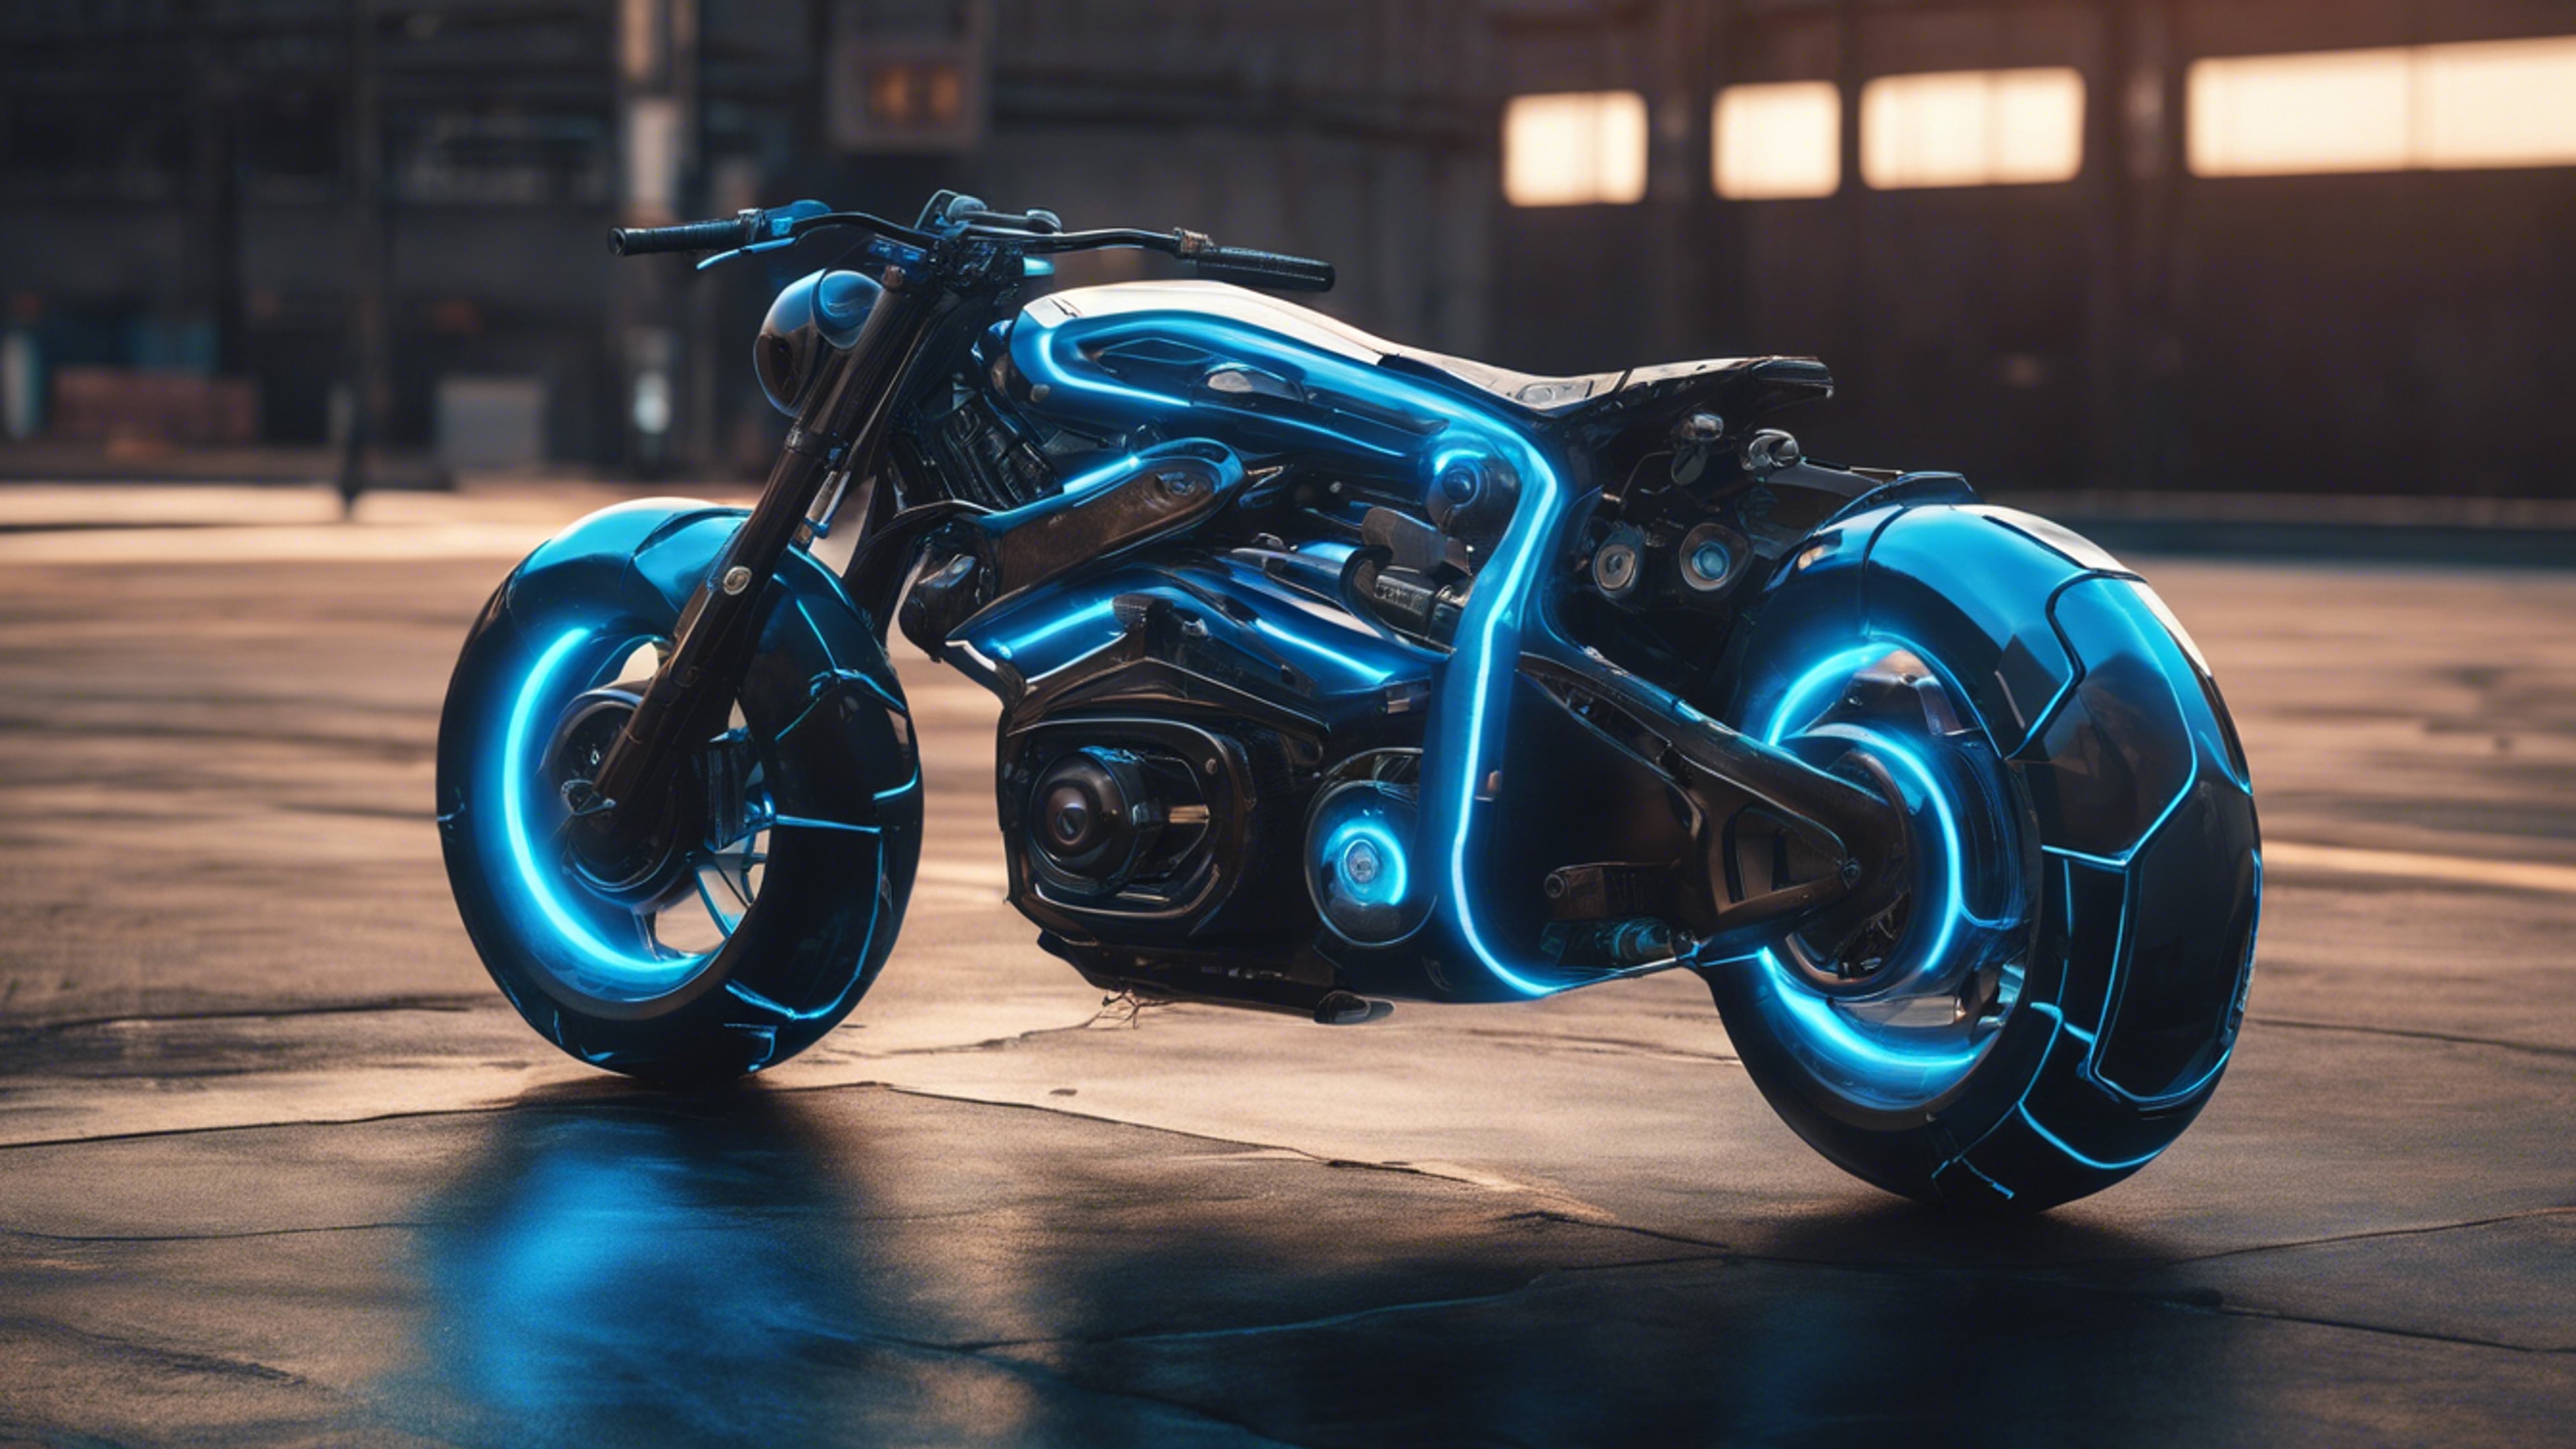 A concept art of a cool futuristic motorcycle, designed in neon black and blue colors. 벽지[616cf7a0093641f39ad2]